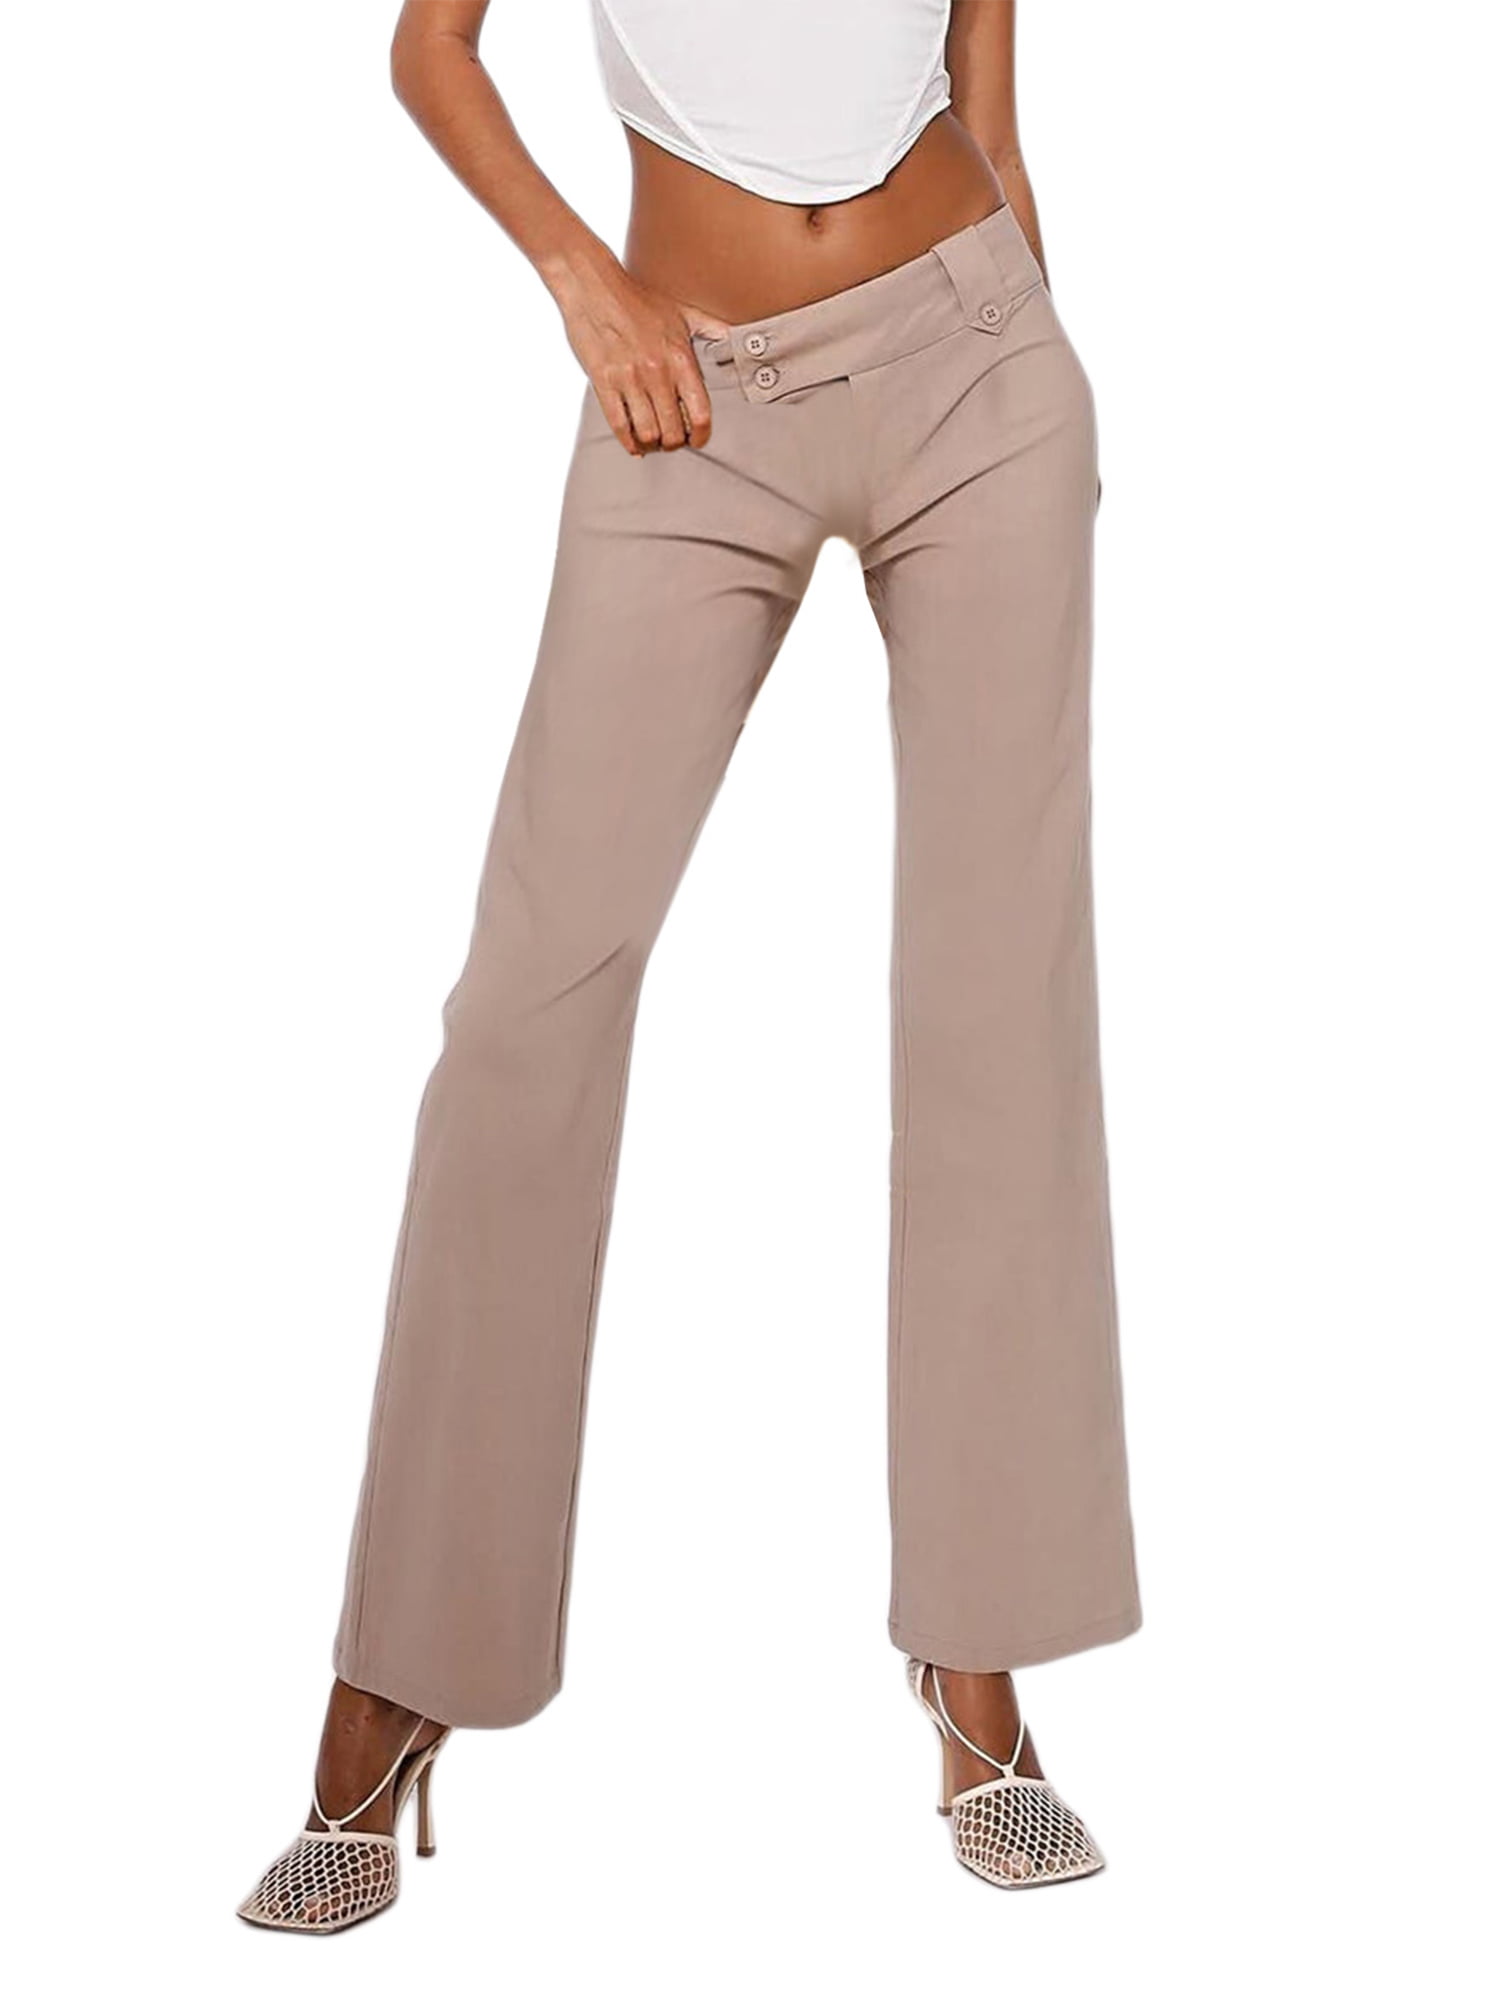 Women\'s Adult Solid Color Casual Female Slightly Waist Pants Pants, Low wdehow Flared Trousers